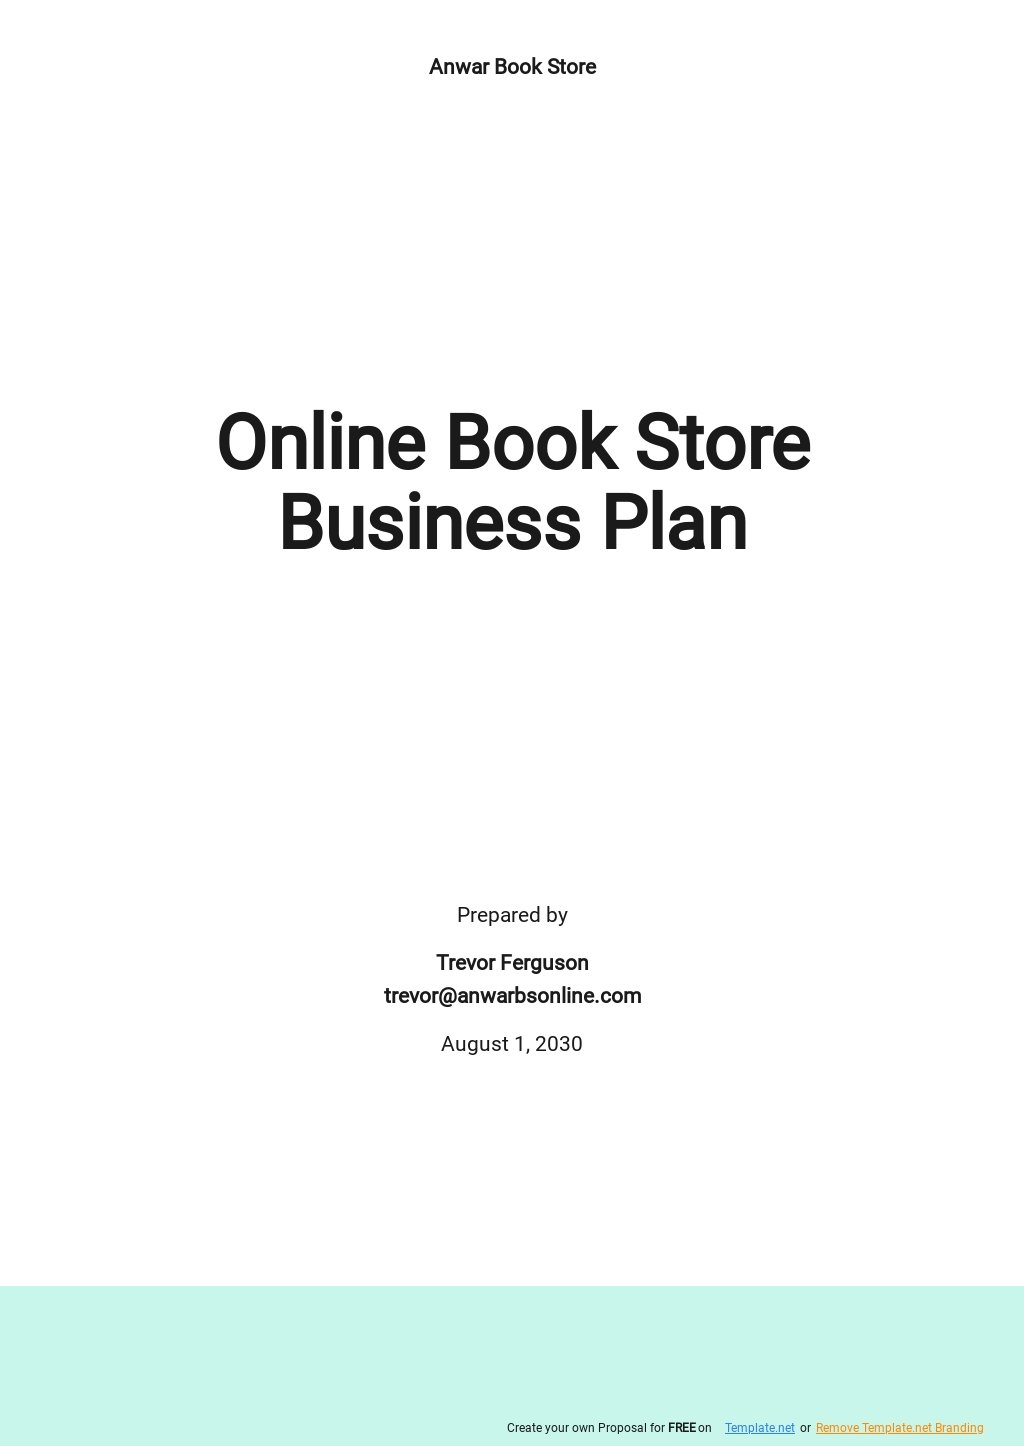 Free Online Book Store Business Plan Template.jpe